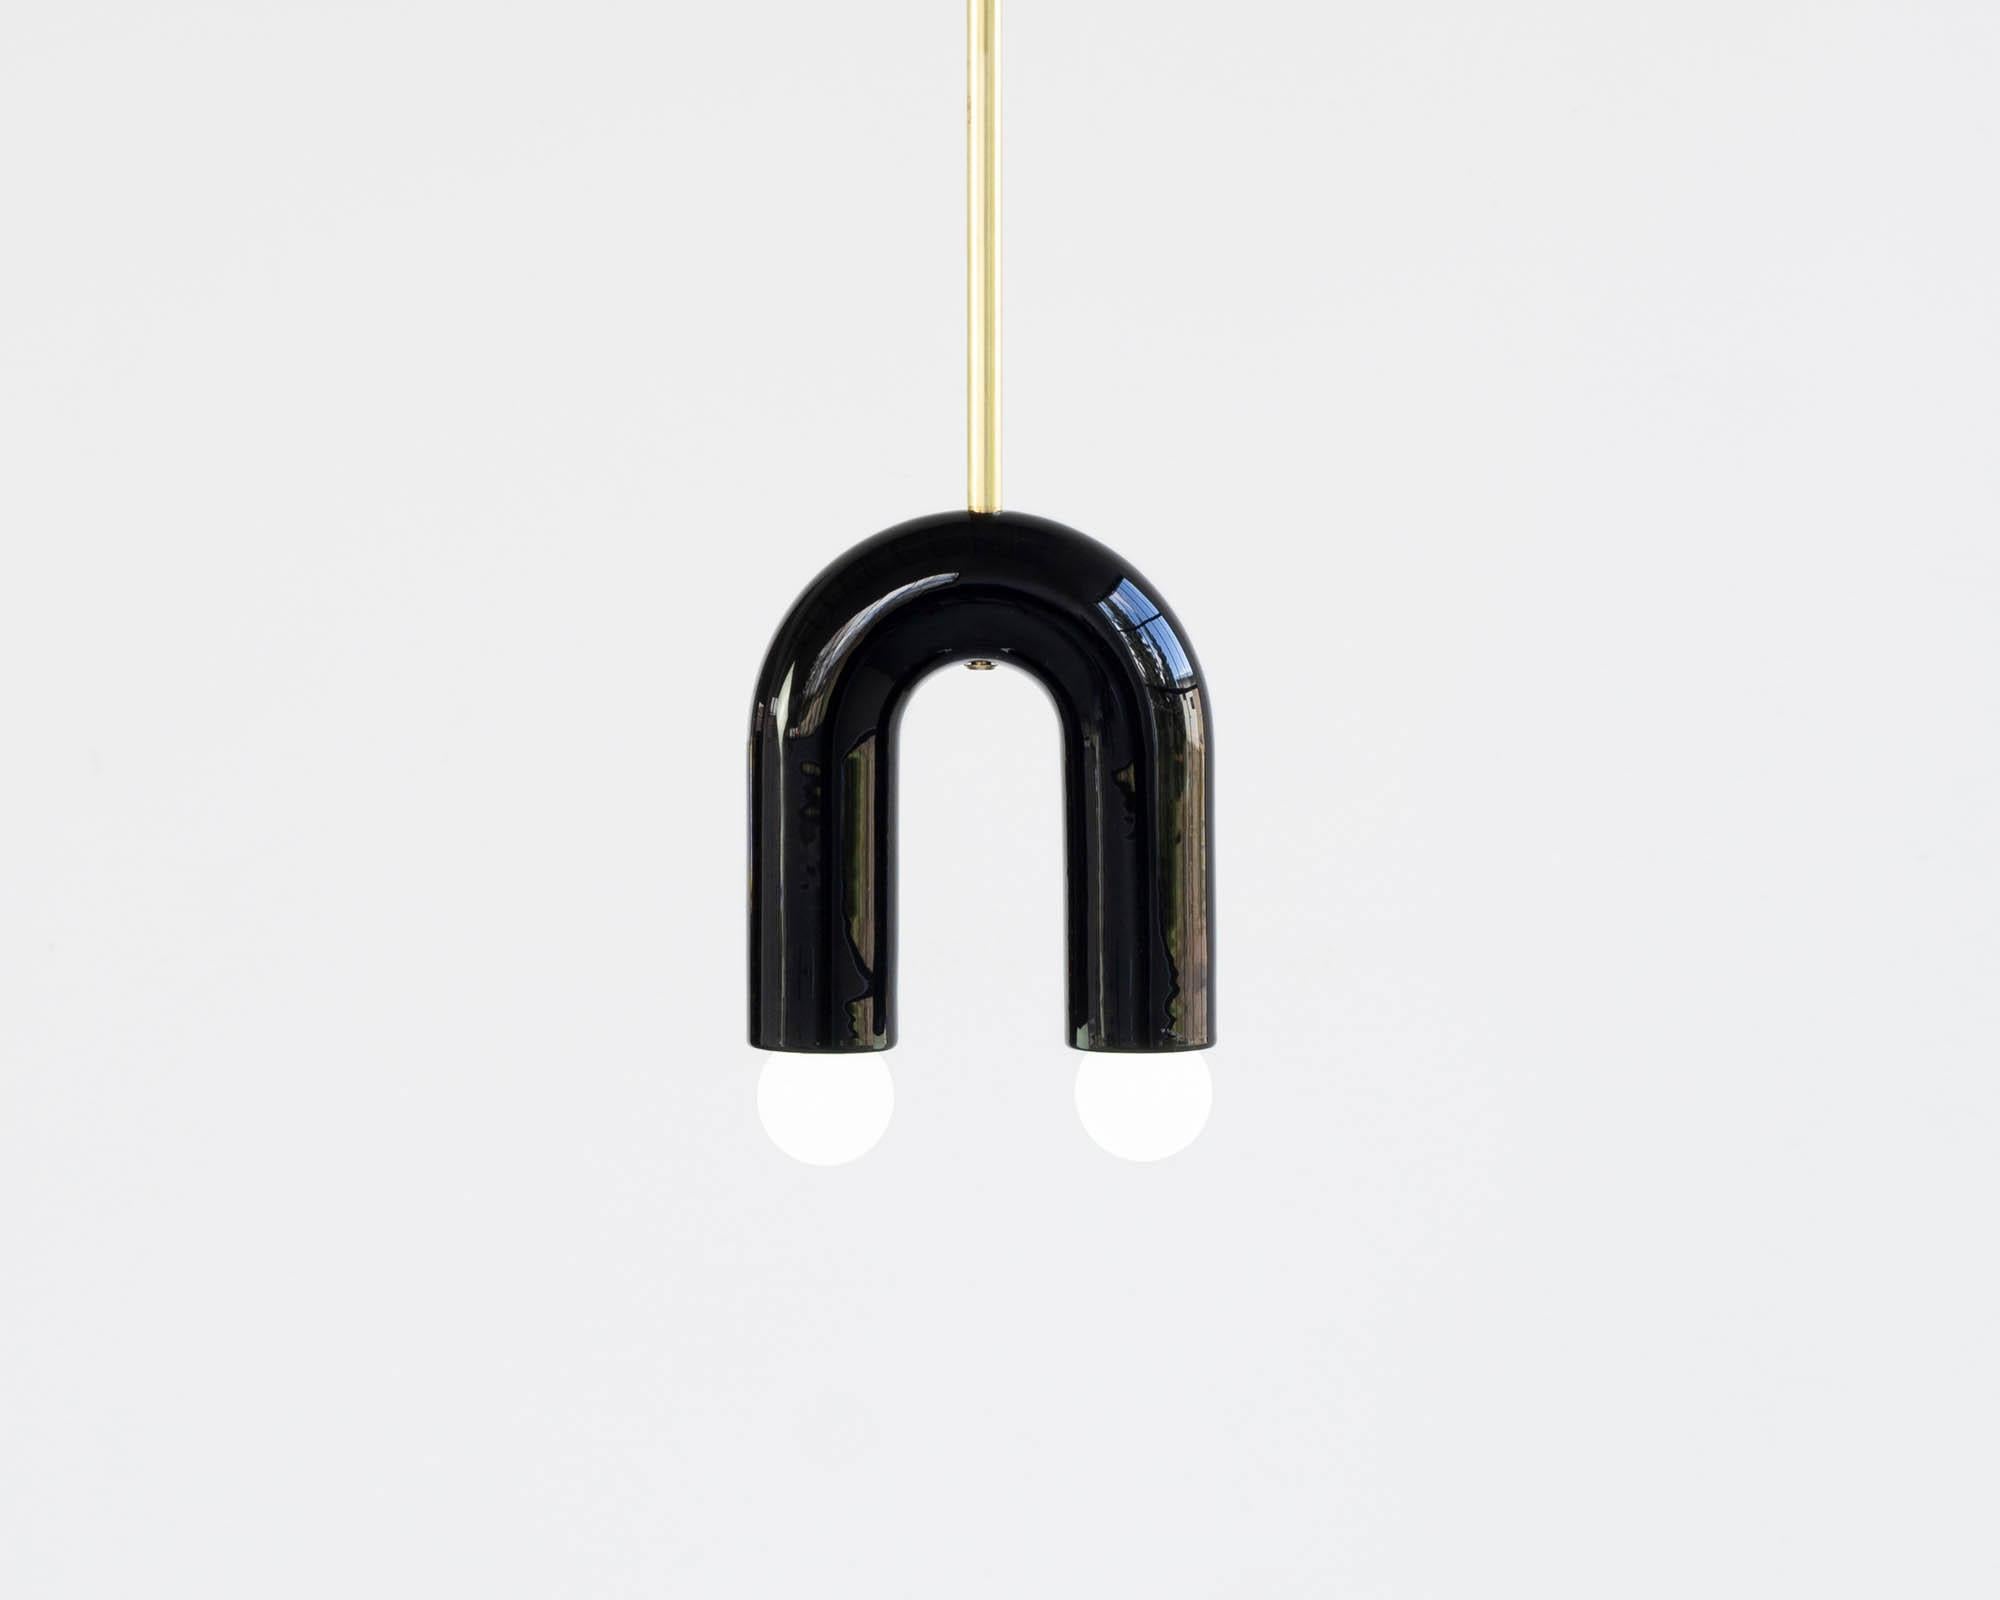 TRN A1 Pendant lamp / ceiling lamp / chandelier
Designer: Pani Jurek

Dimensions: H 17.5 x 15 x 5 cm
Model shown: Black

Bulb (not included): E27/E26, compatible with US electric system

Materials: Hand glazed ceramic and brass
Rod: brass, length